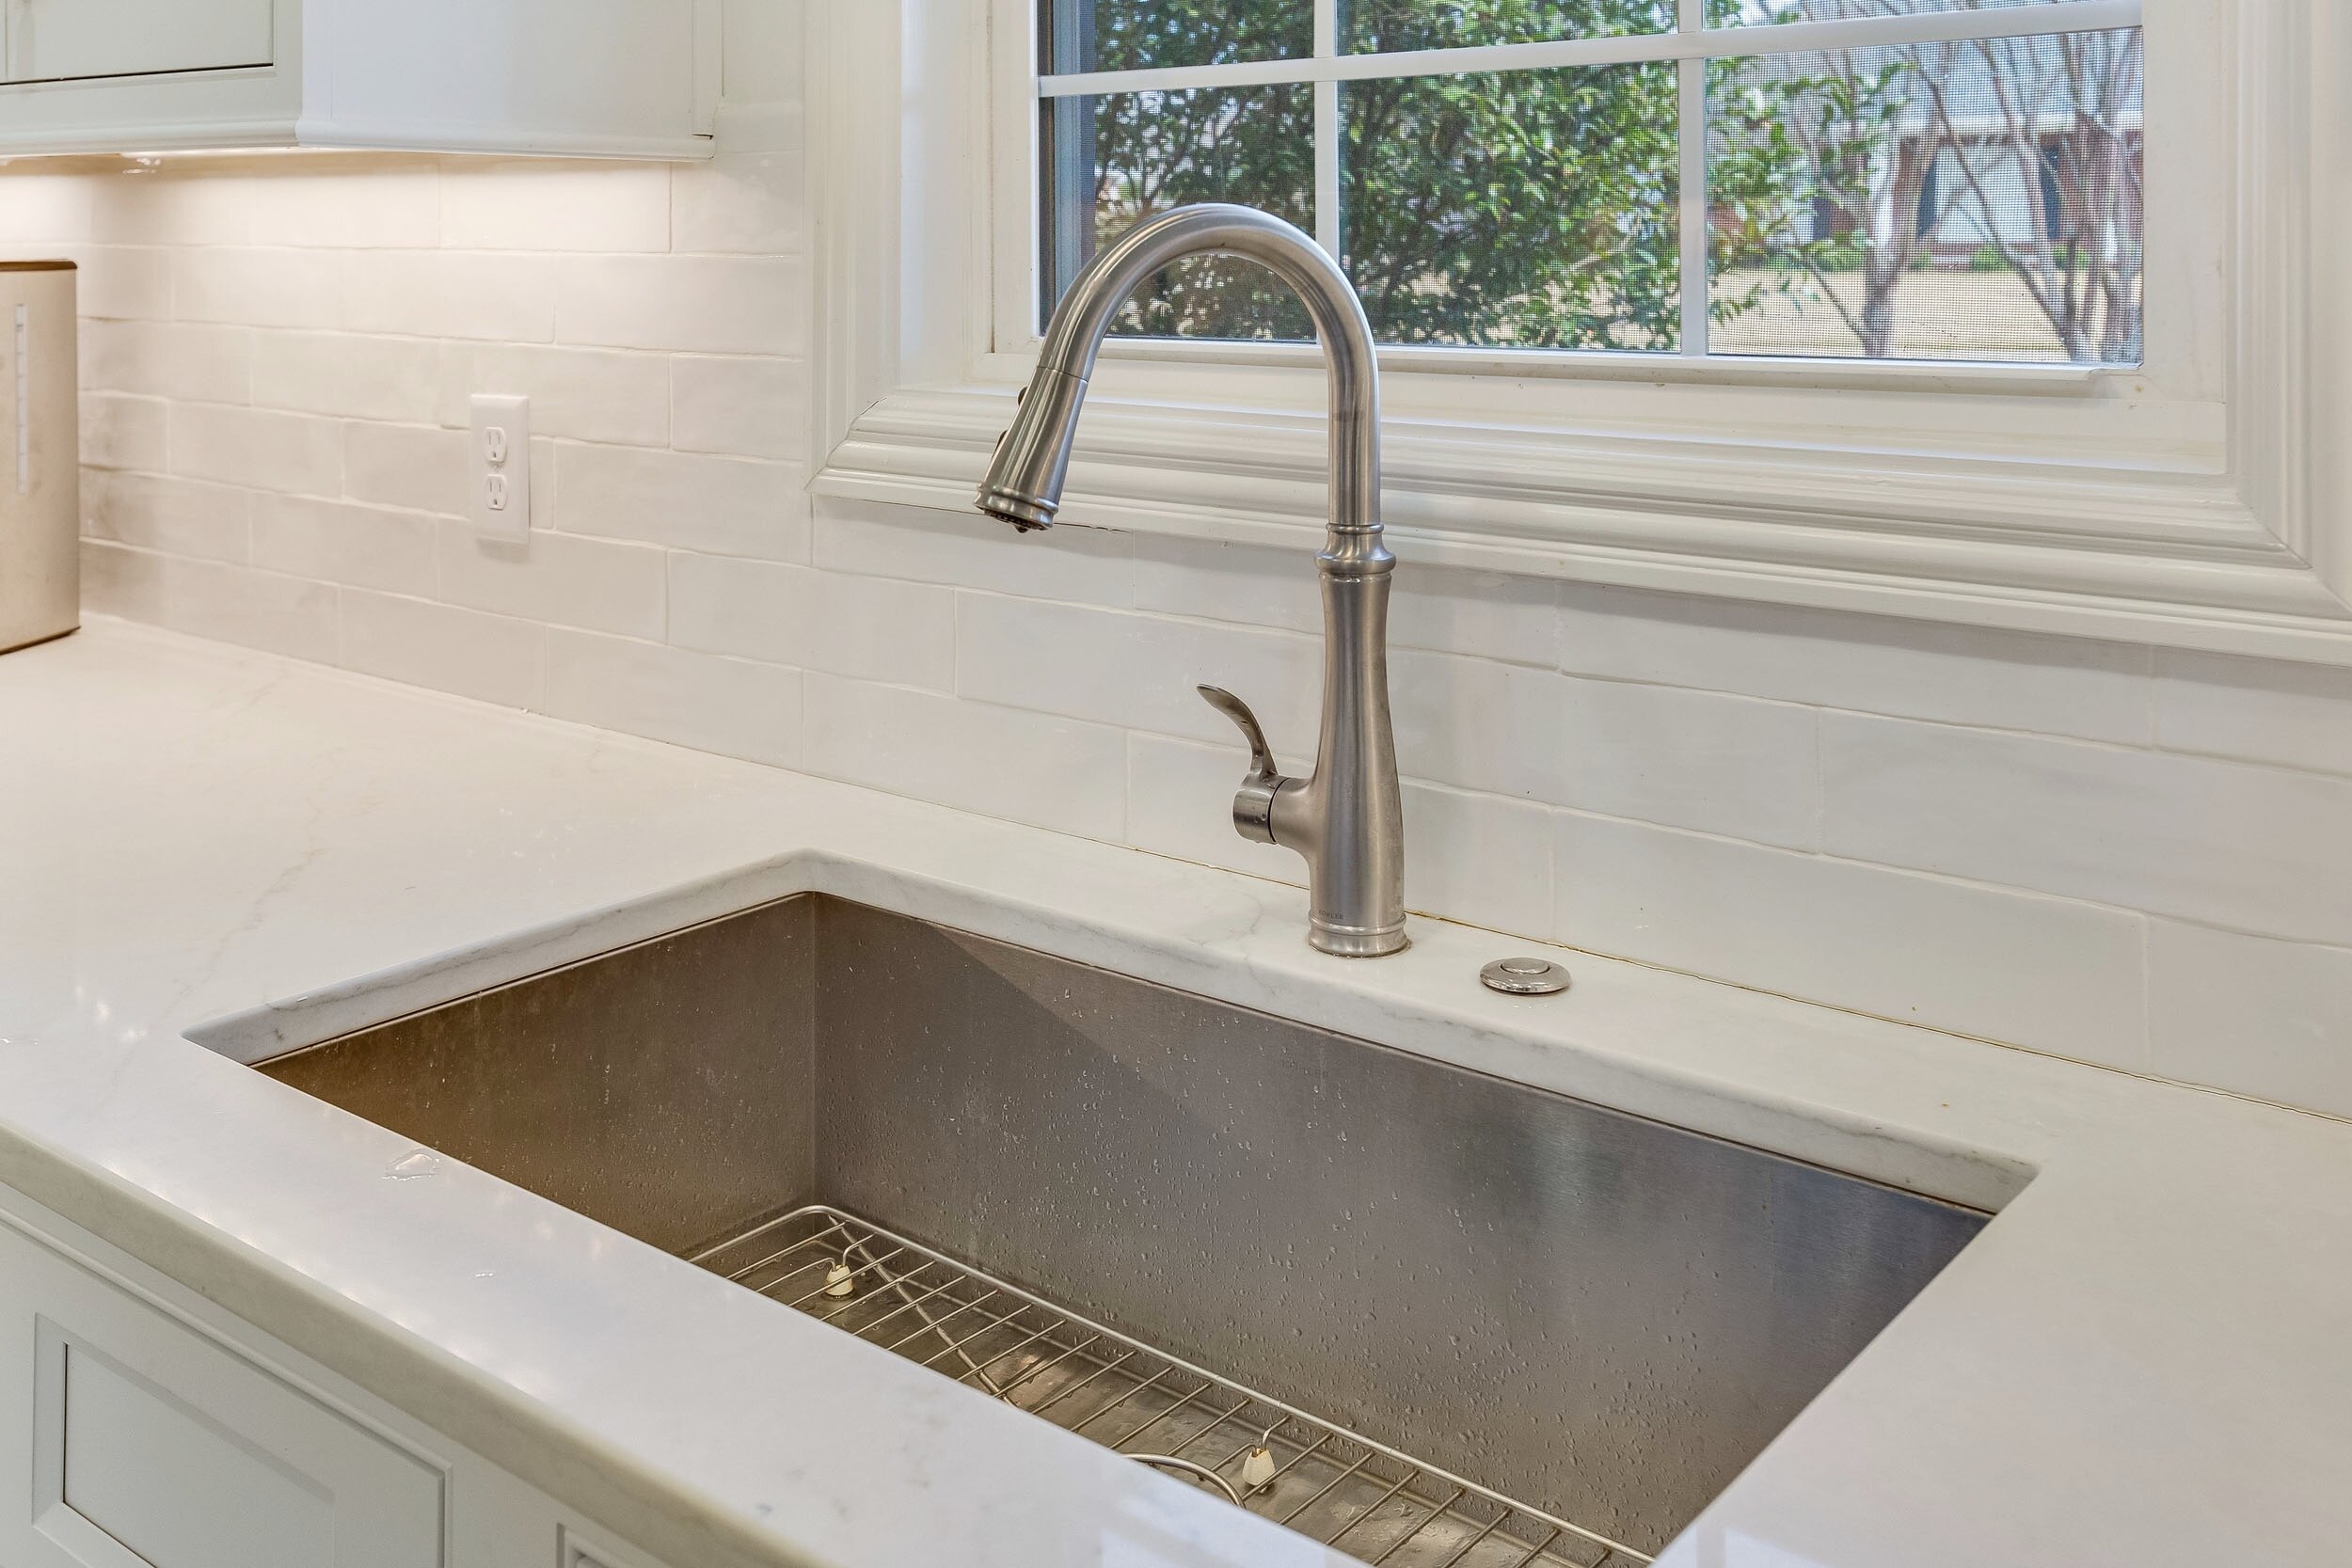 What Are The Top Tips For Choosing Kitchen Backsplash?